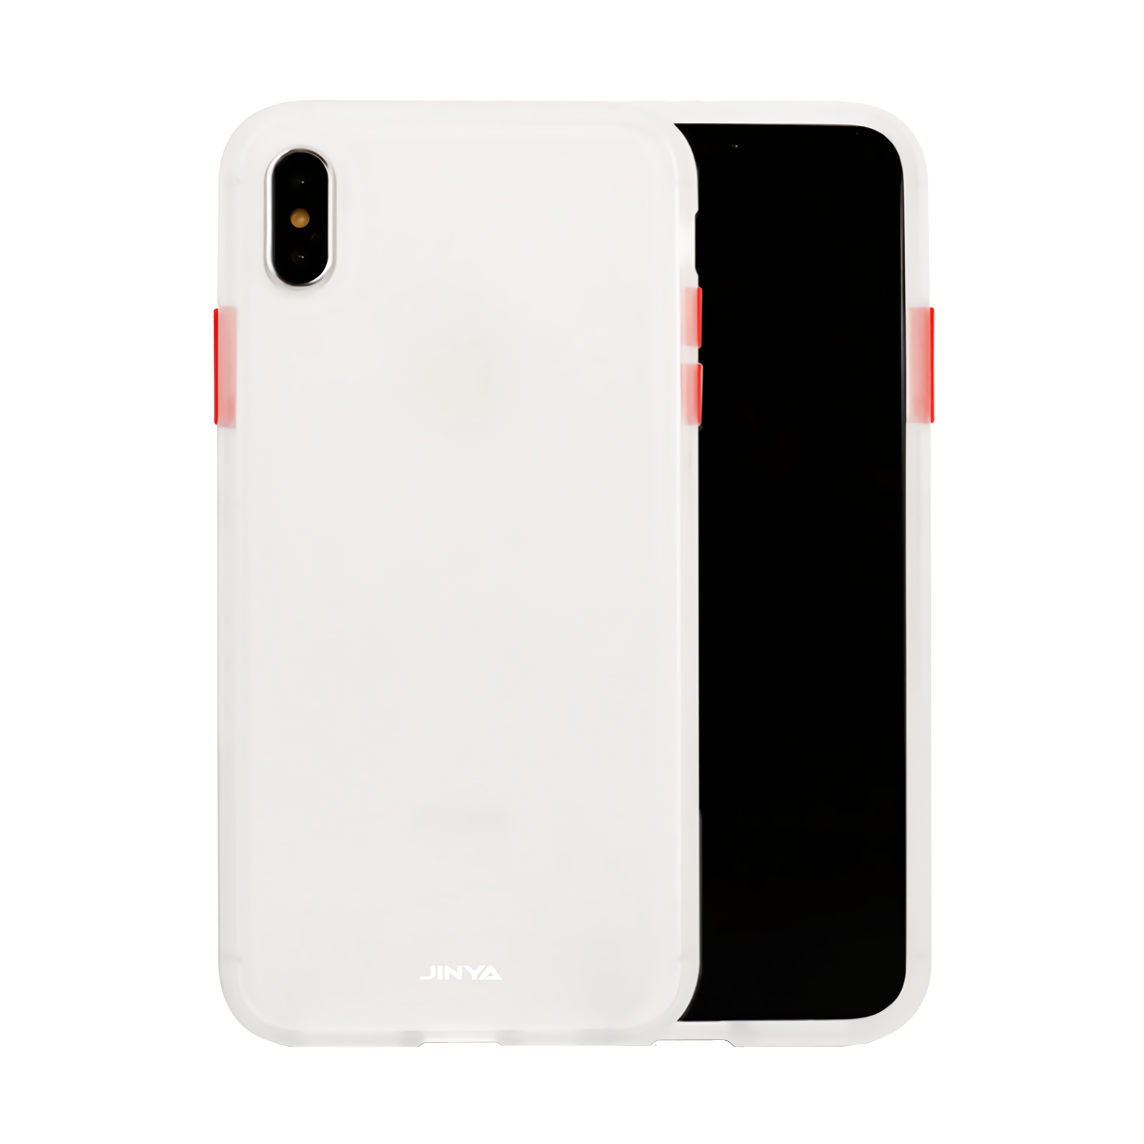 Jinya Sandy Pro Case for IPhone XS Max